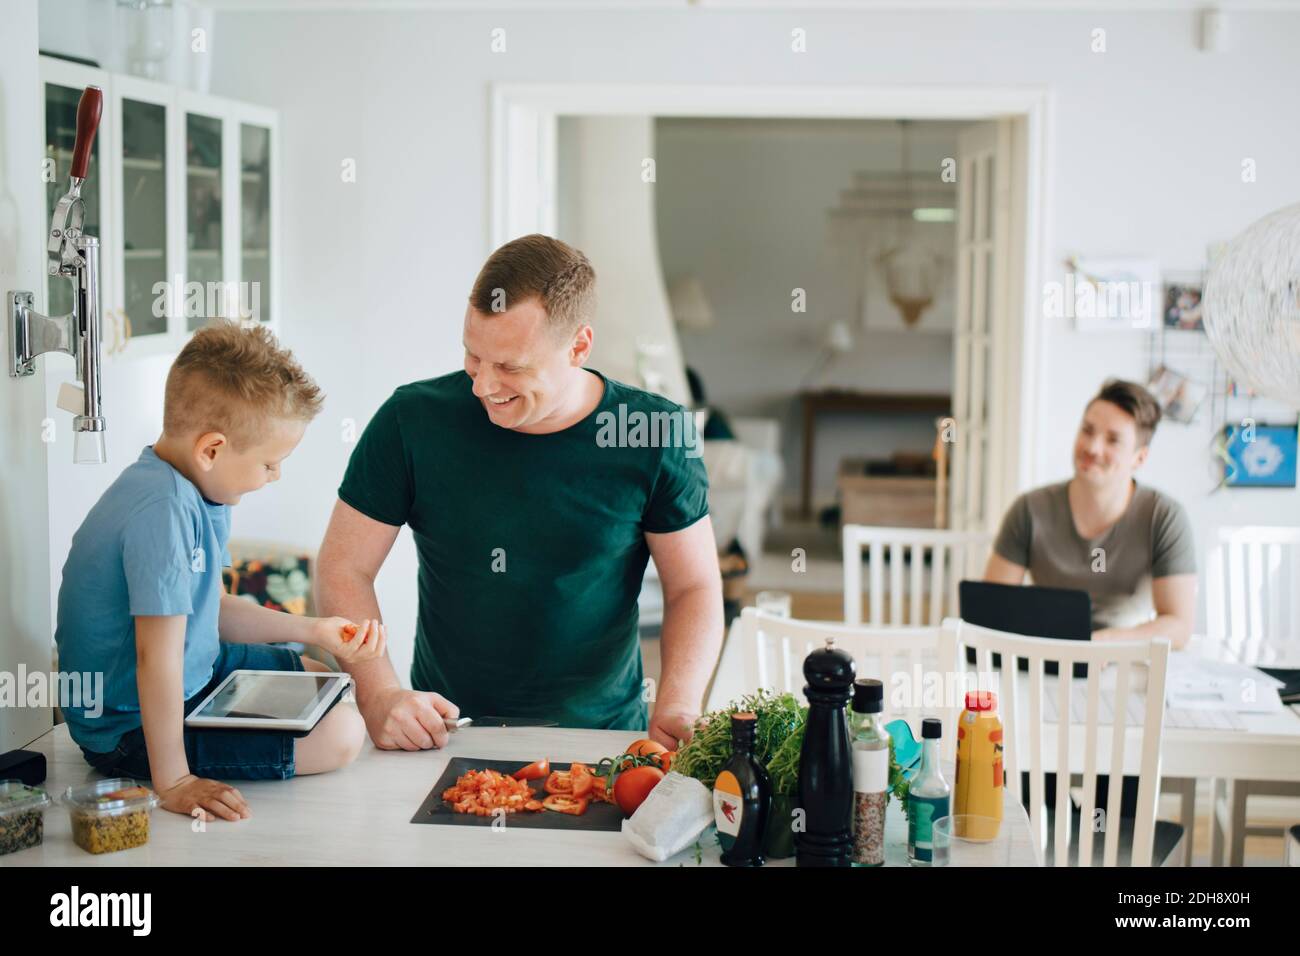 Smiling father talking to son holding tomato while using digital tablet on kitchen counter Stock Photo